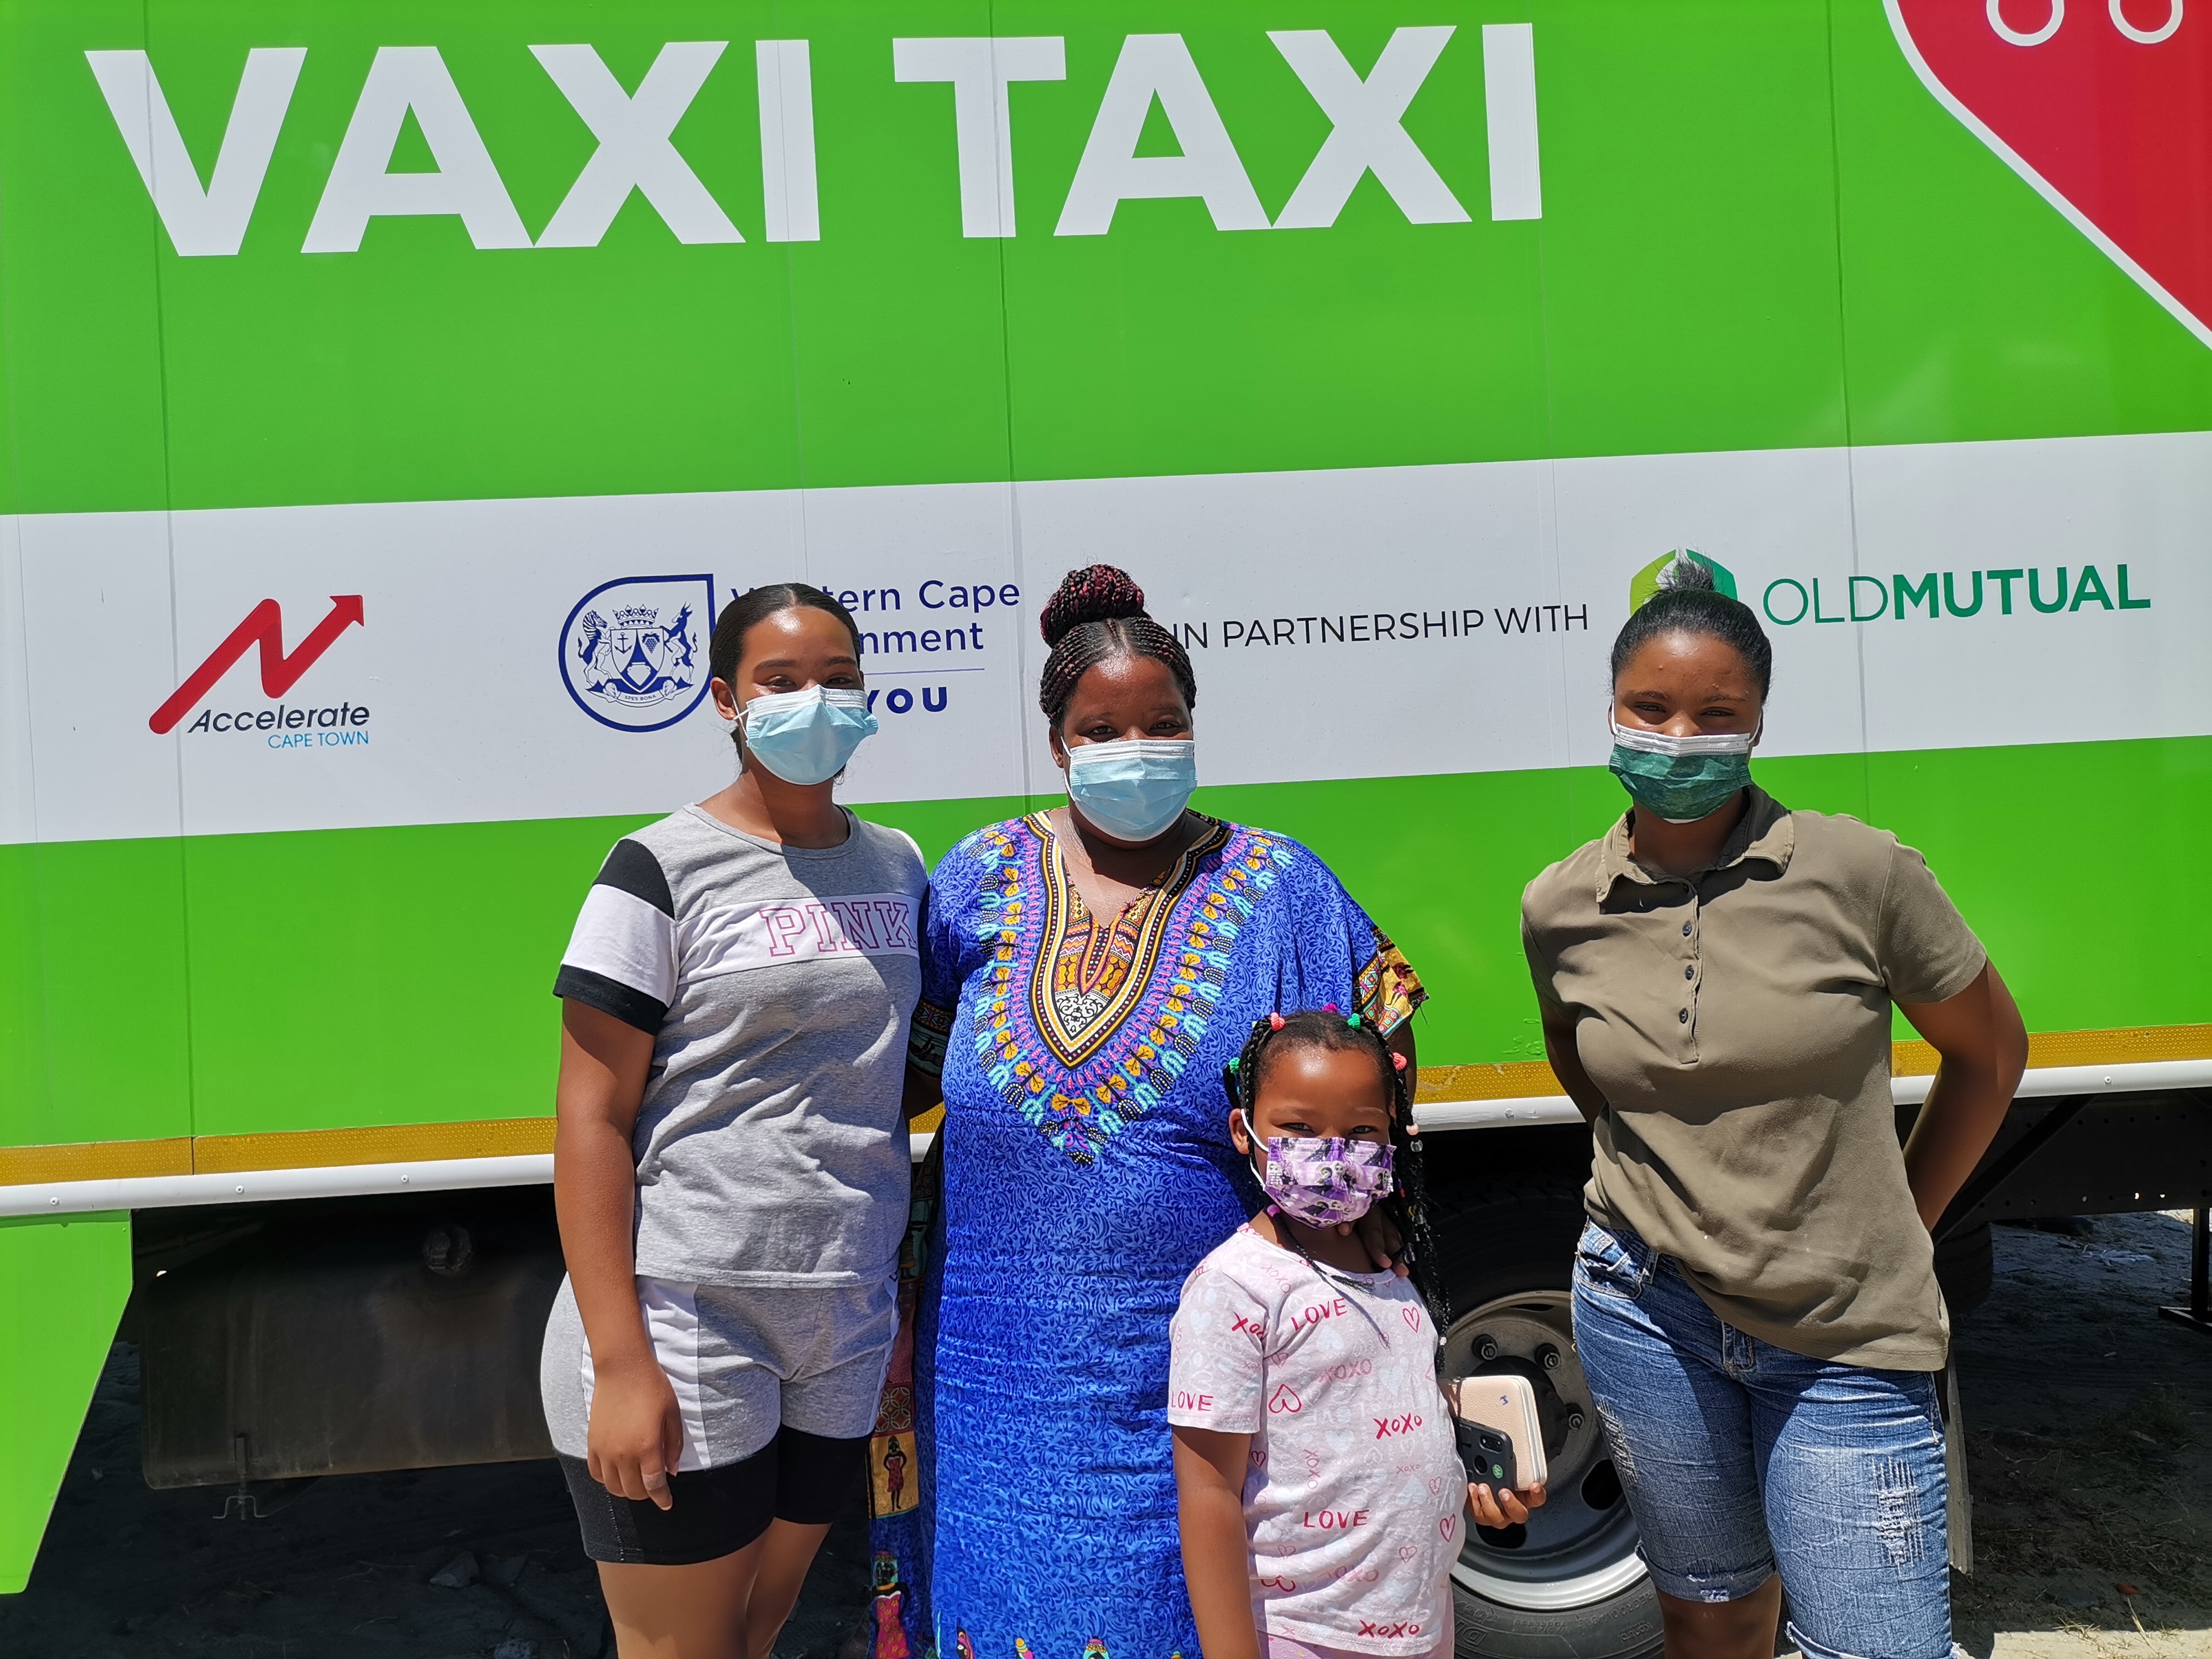 Bonita Thomas visited the Vaxi Trokkie with her daughters and niece in Delft.